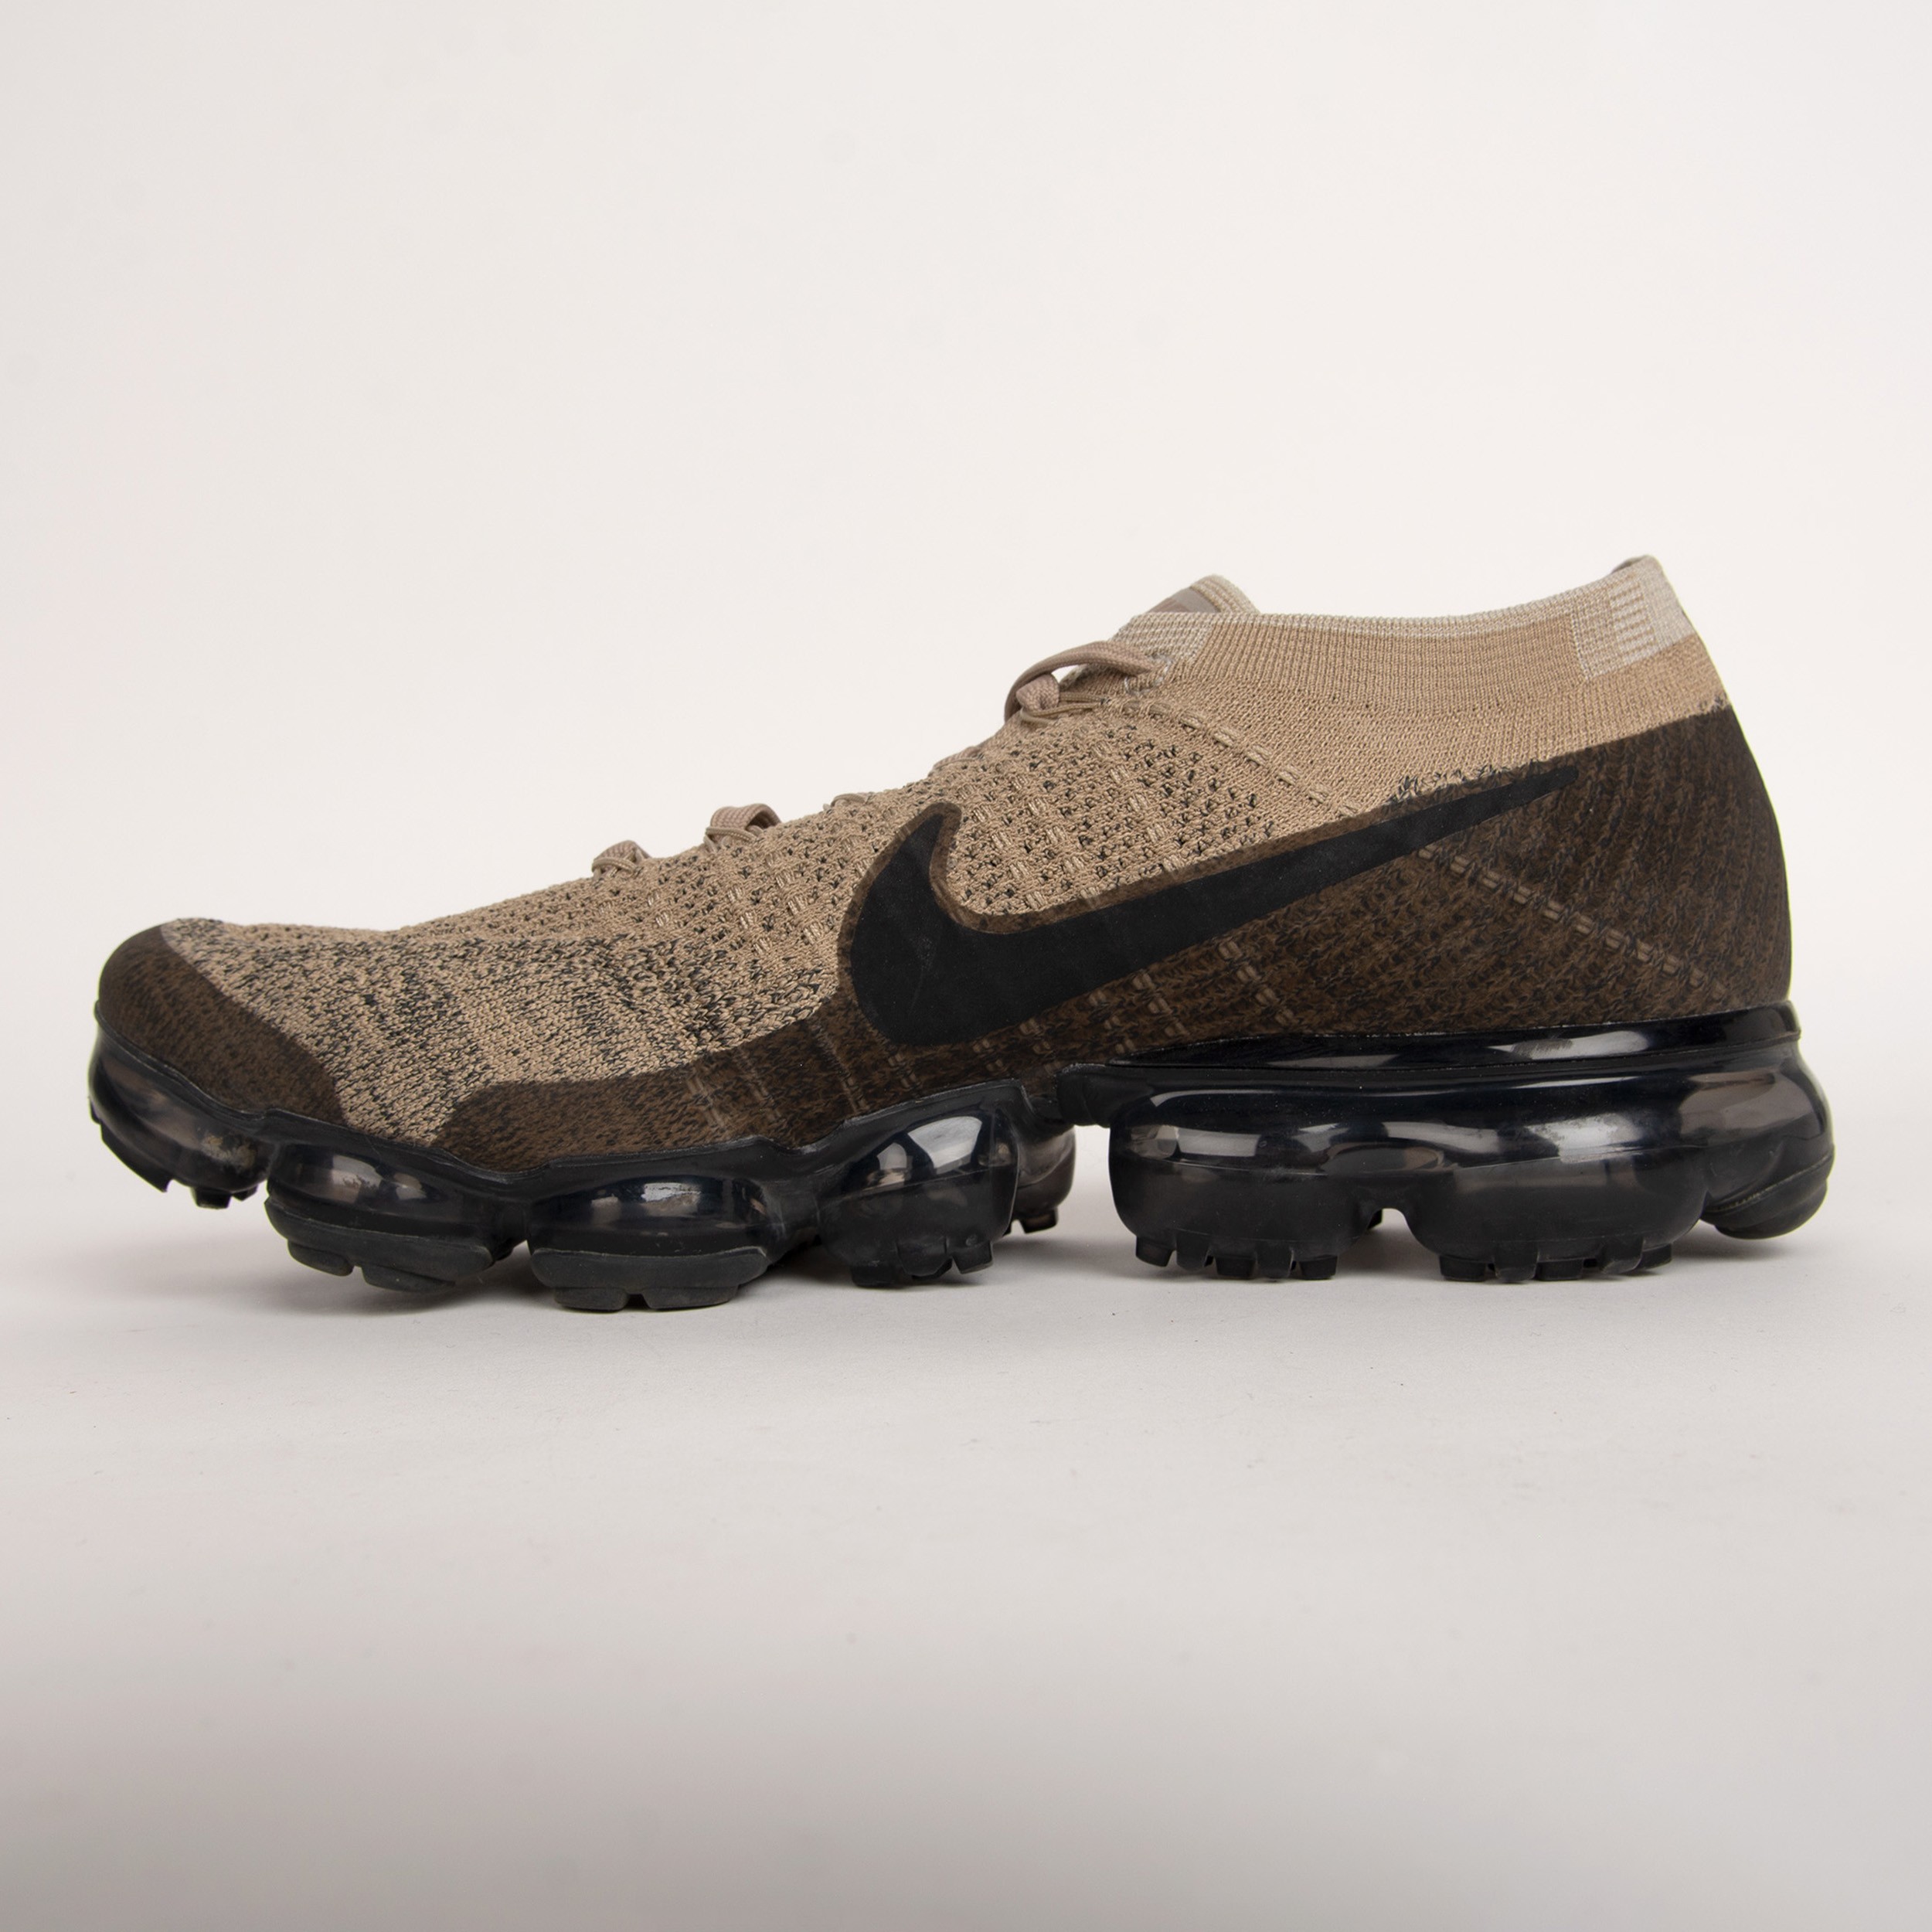 RE-POCKETS NIKE TRAINERS VAPORMAX BUBBLE SOLE GREEN/GREY